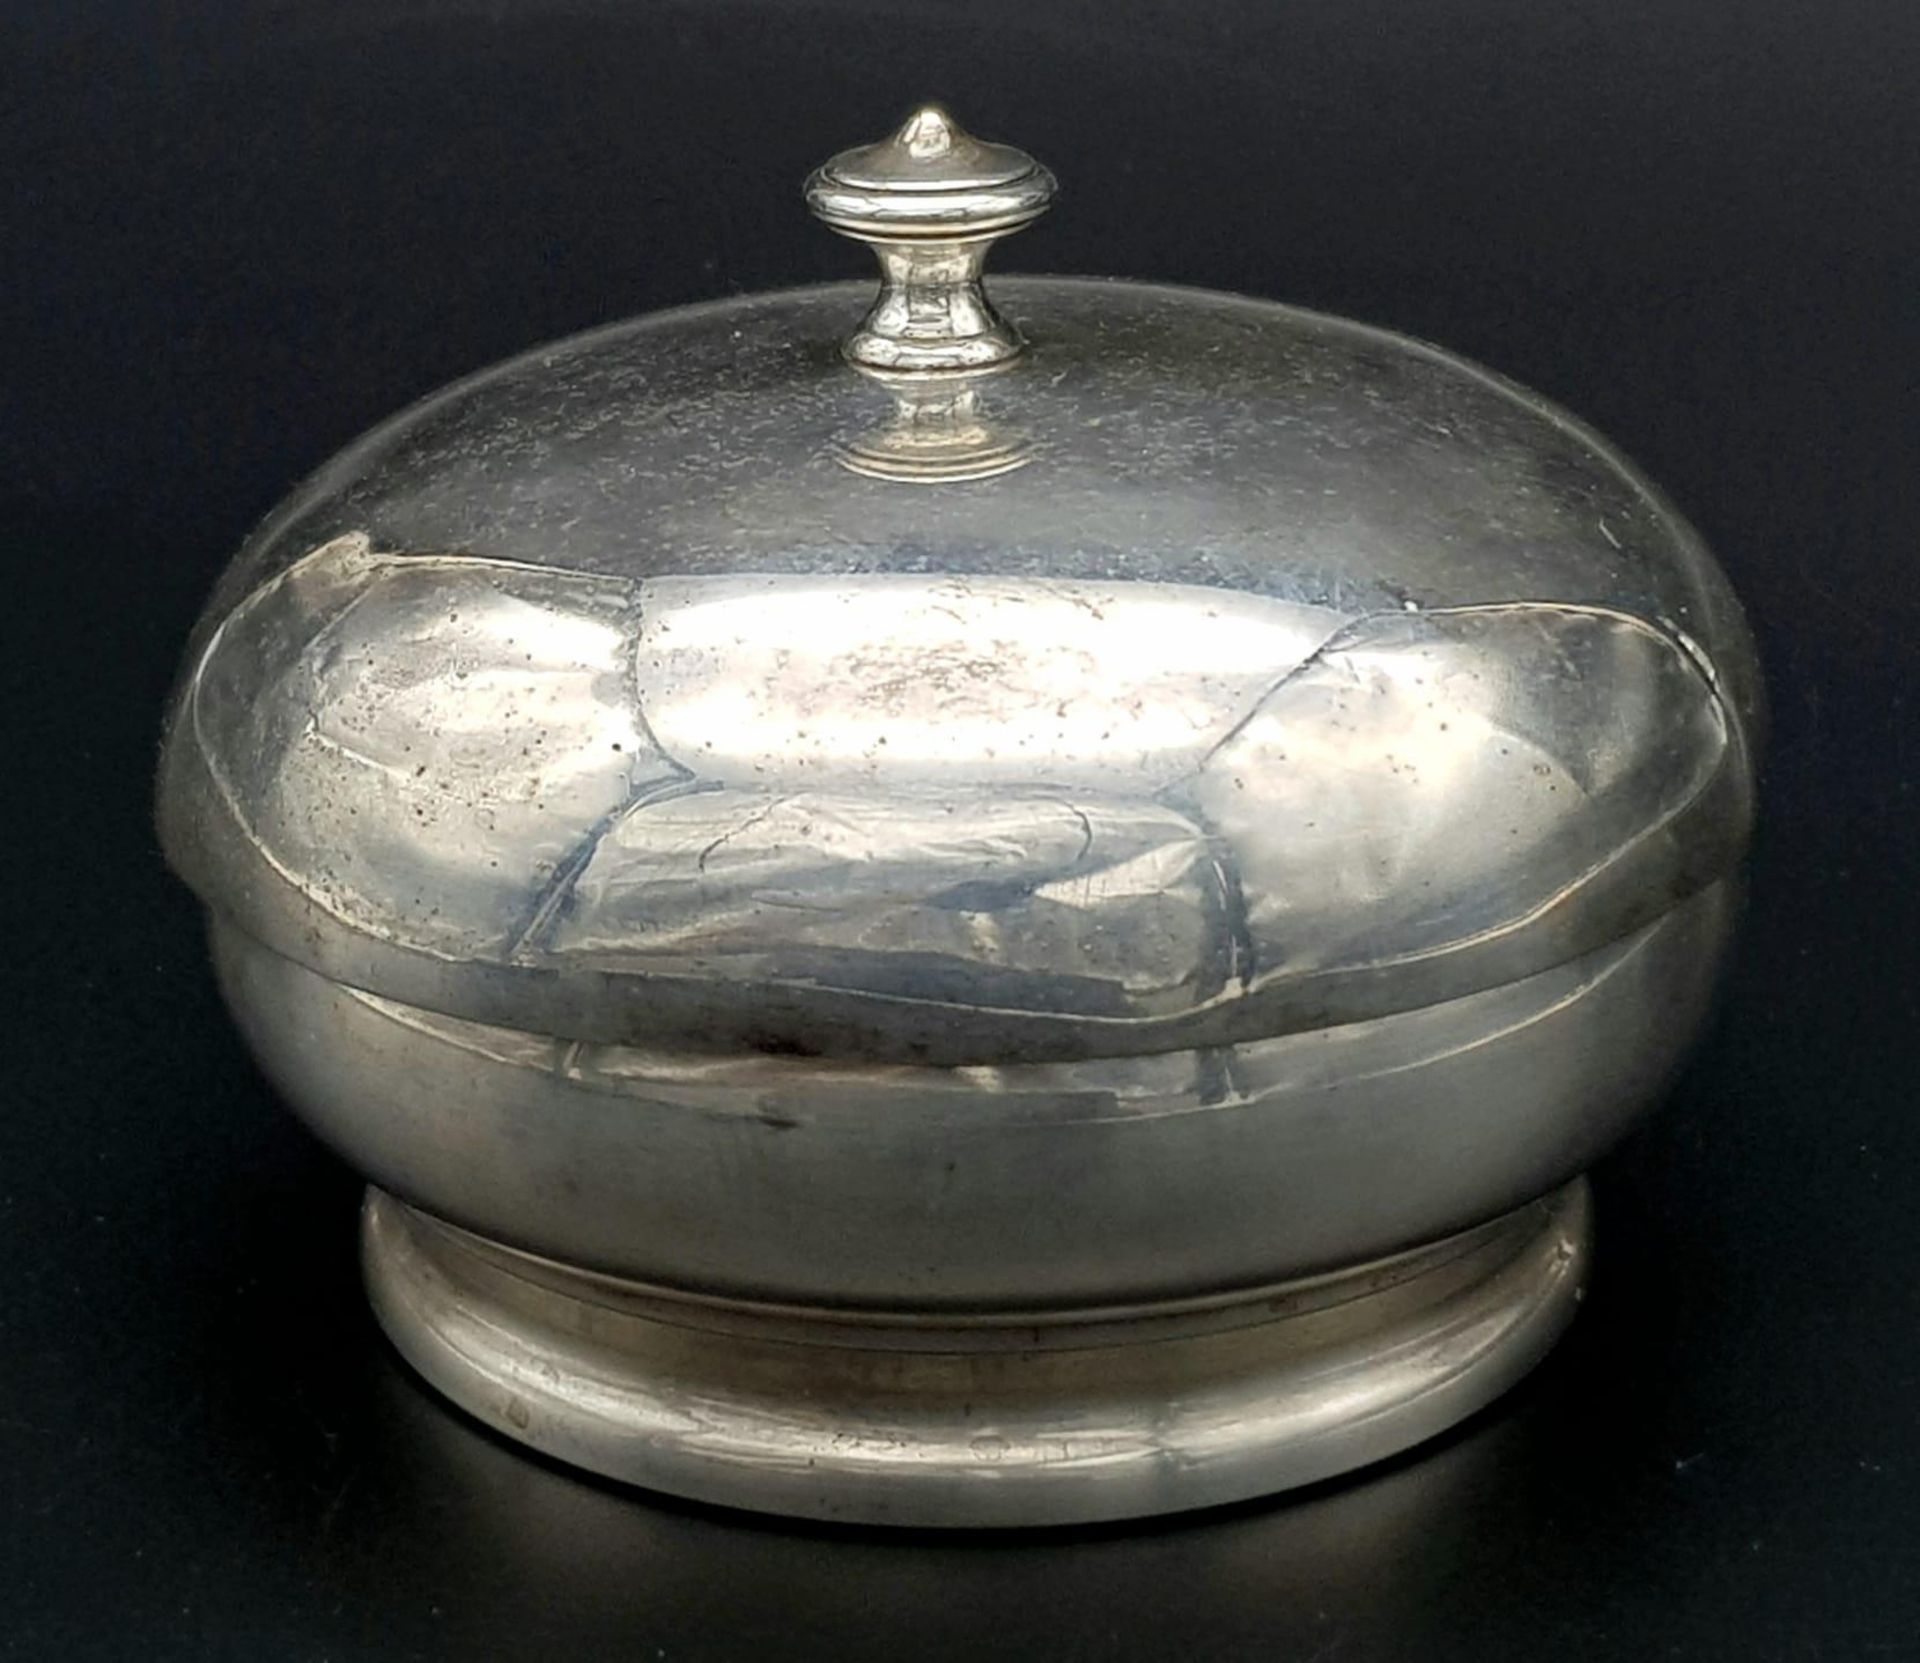 A SOLID SILVER TRINKET BOX IN THE SHAPE OF A SERVICE BELL . 164gms 11cms DIAMETER - Image 2 of 5